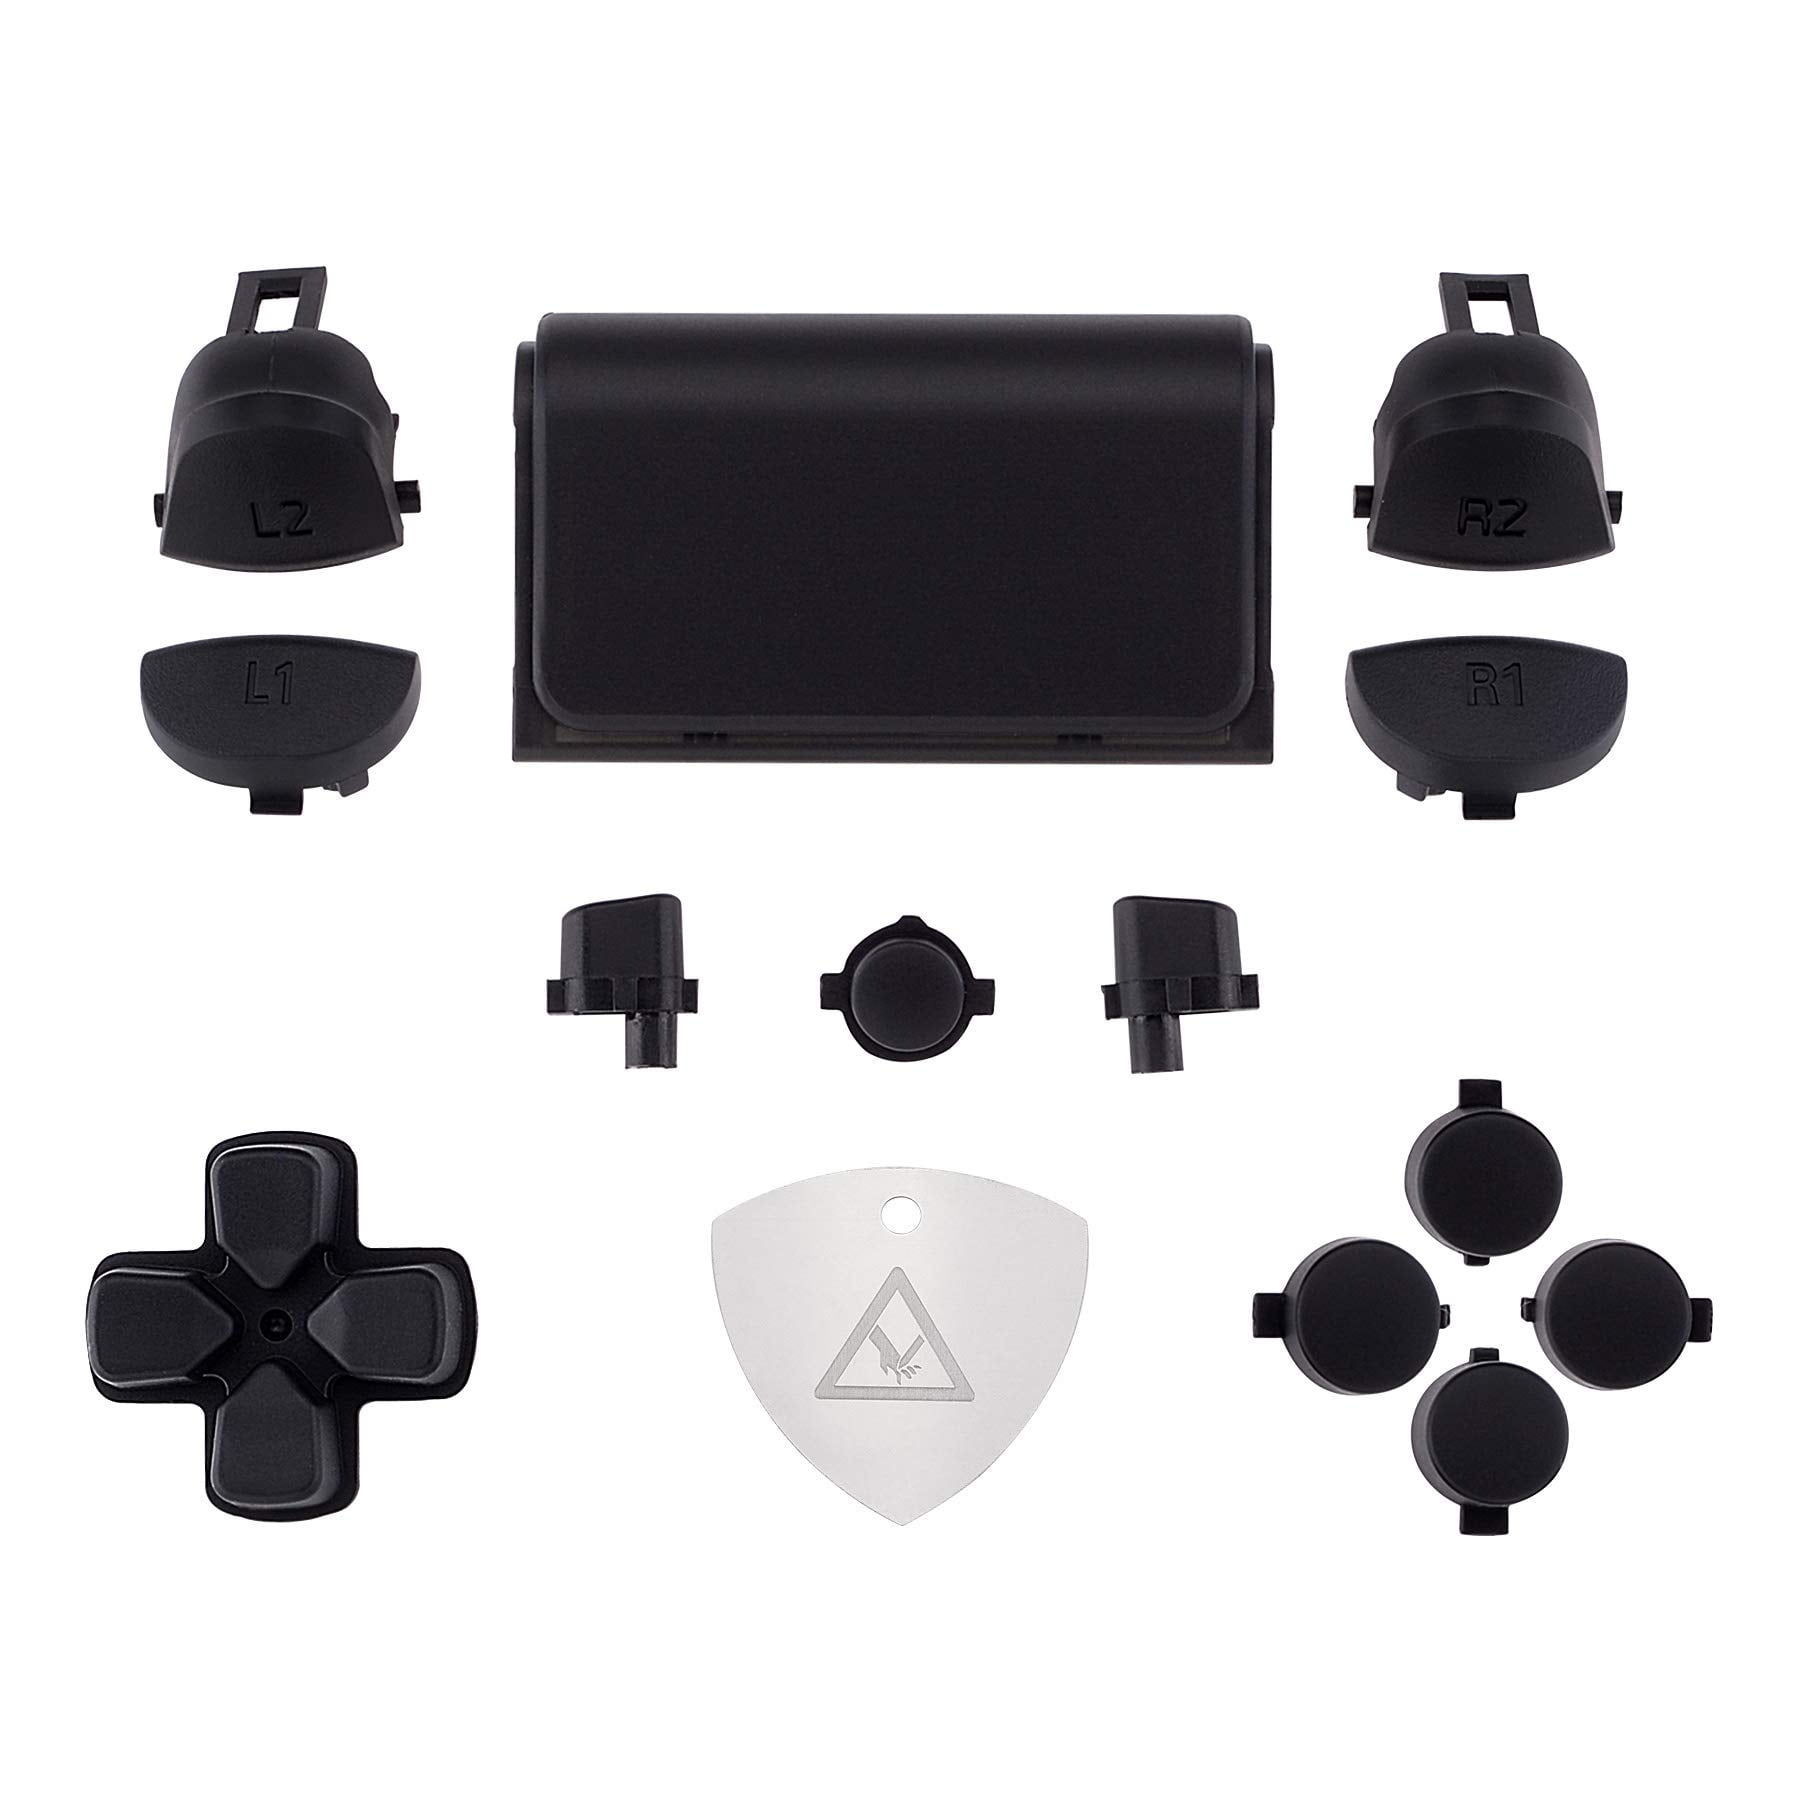 Buttons Full D-pad Orange Repair Kits Slim for CUH-ZCT2 eXtremeRate Replacement Controller, for Controller R1 Options L1 L2 Buttons ps4 ps4 Share Touchpad Set Action R2 Home Pro Triggers